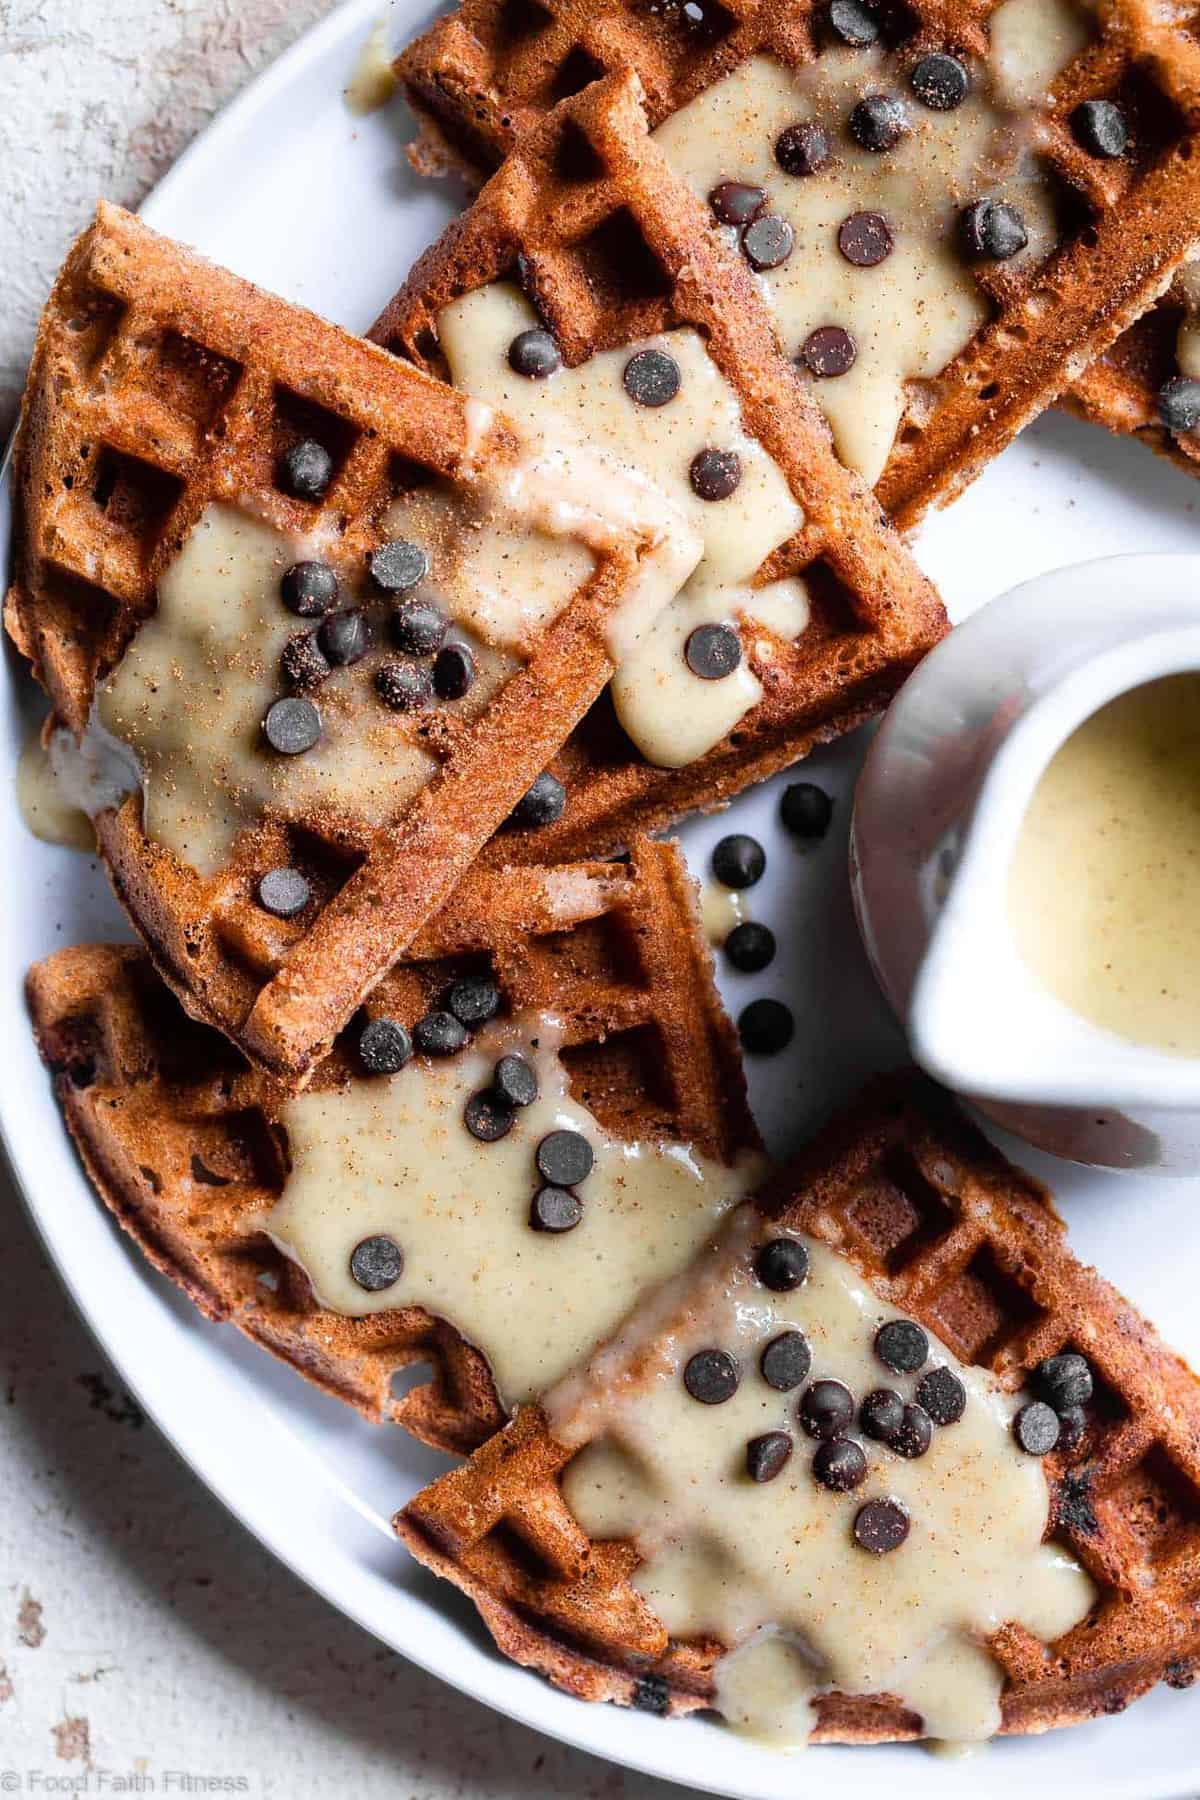 Gluten Free Vegan Waffles with Eggnog "Cream" Sauce - These FLUFFY vegan waffles are studded with chocolate chips and covered with a healthy eggnog "cream" sauce! A delicious holiday breakfast that you can make ahead for easy mornings! | #Foodfaithfitness | #Glutenfree #Vegan #Dairyfree #Eggfree #Healthy